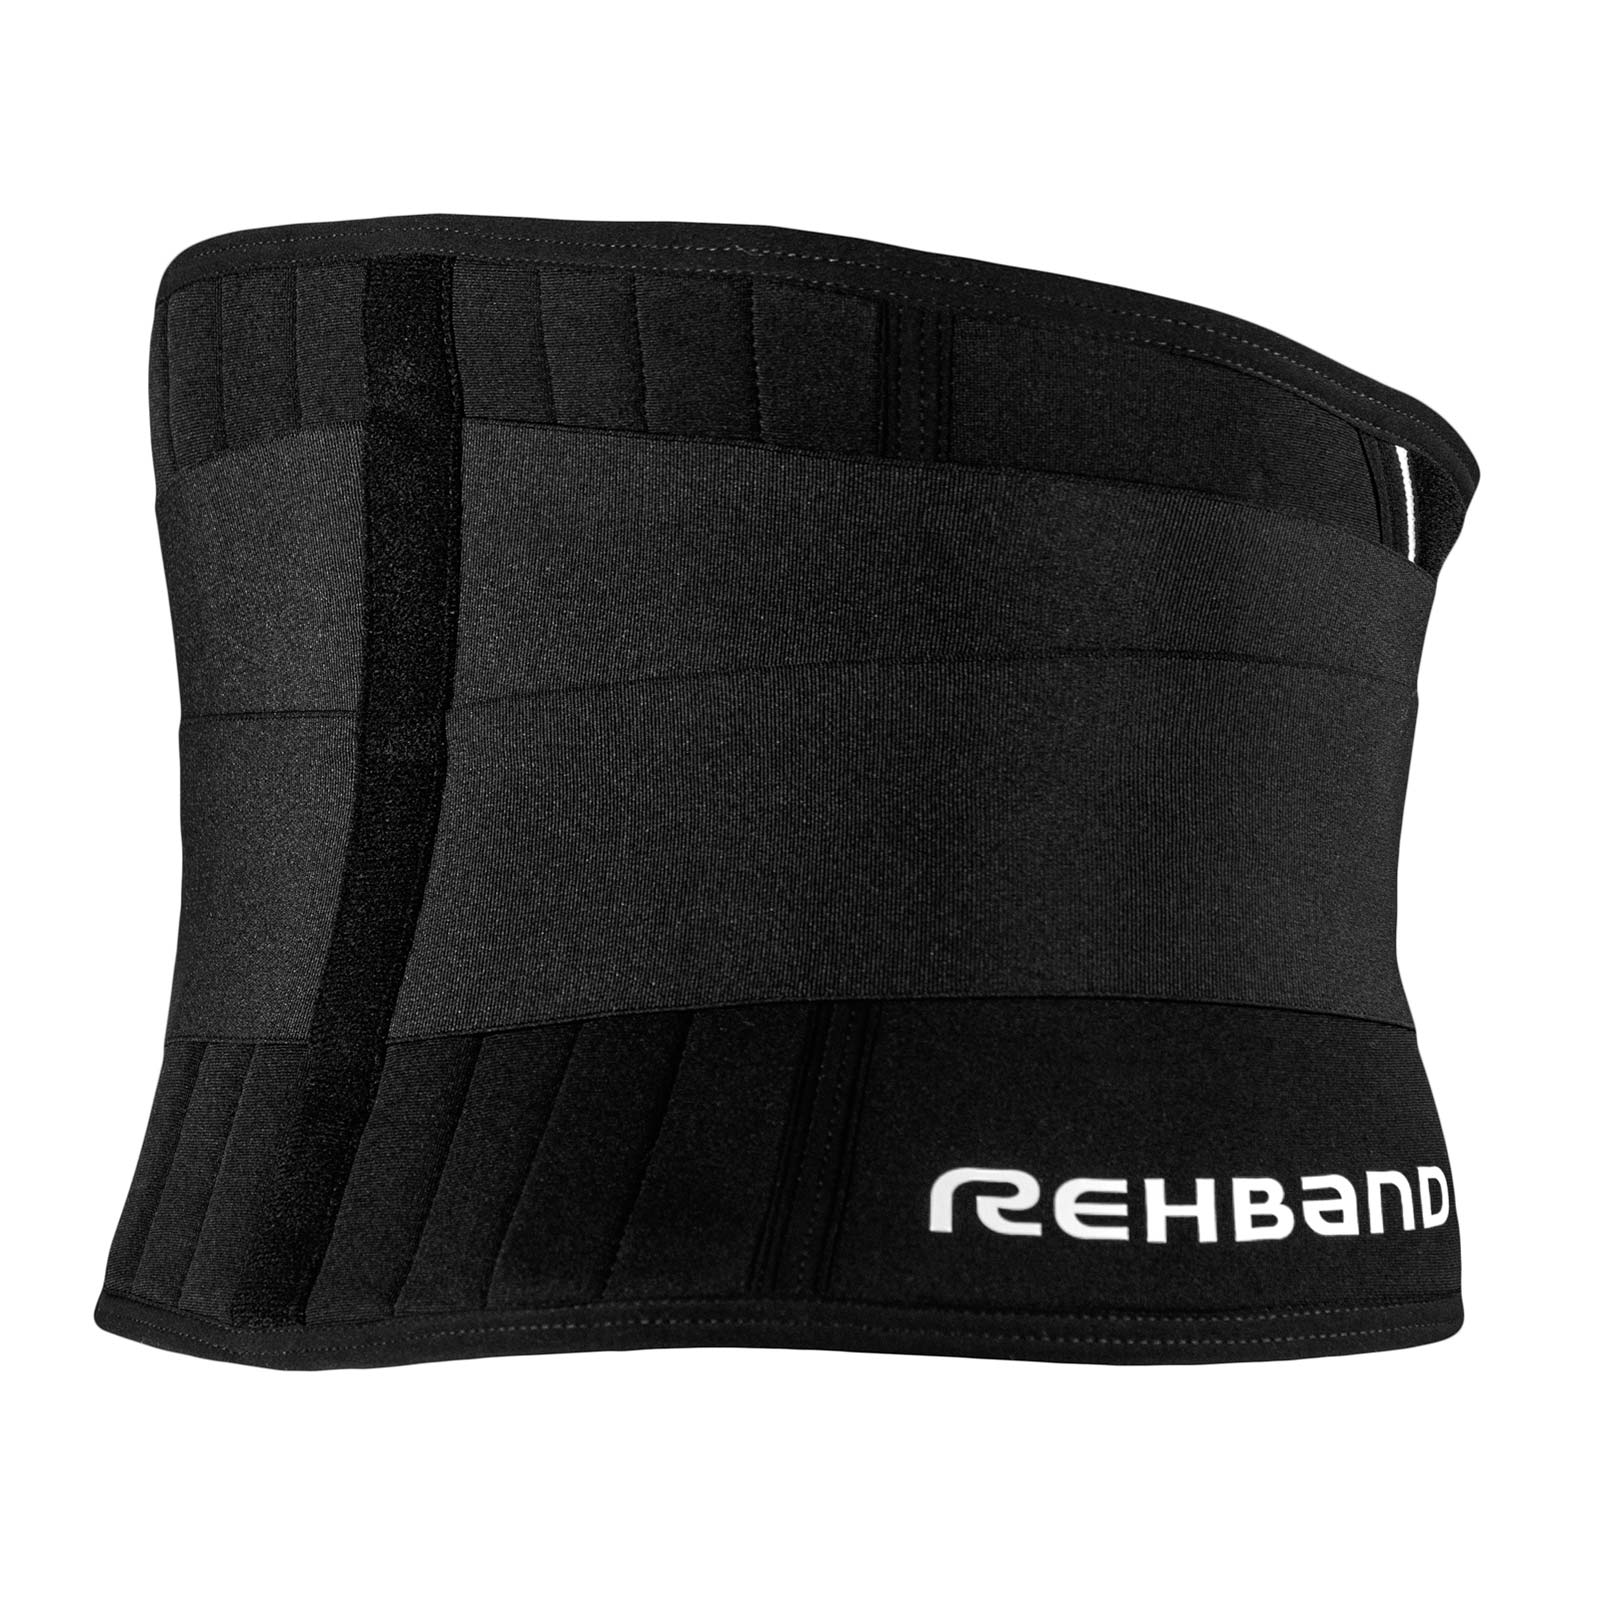 A black back support with a white Rehband lettering at the side